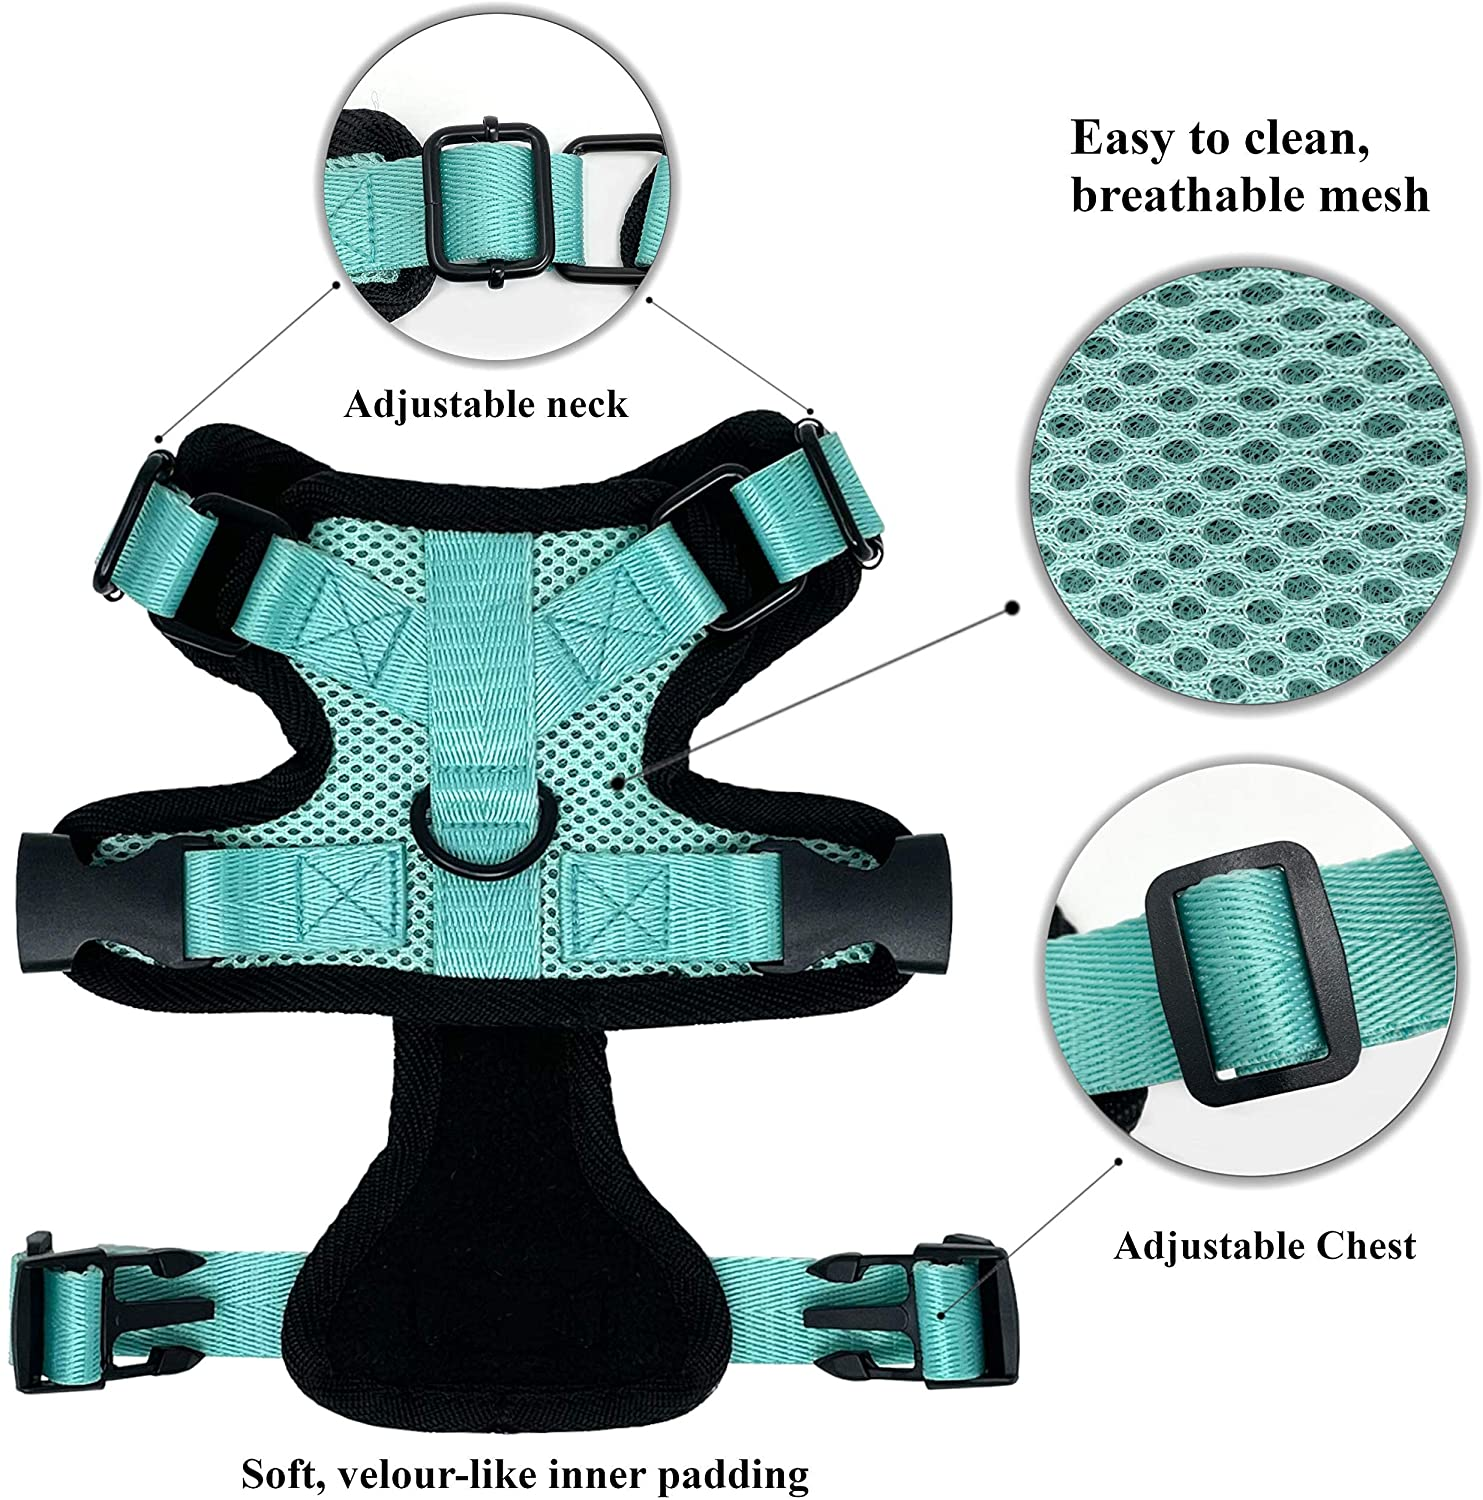 Cat Harness and Leash Adjustable for Walking - Nurturing Pets